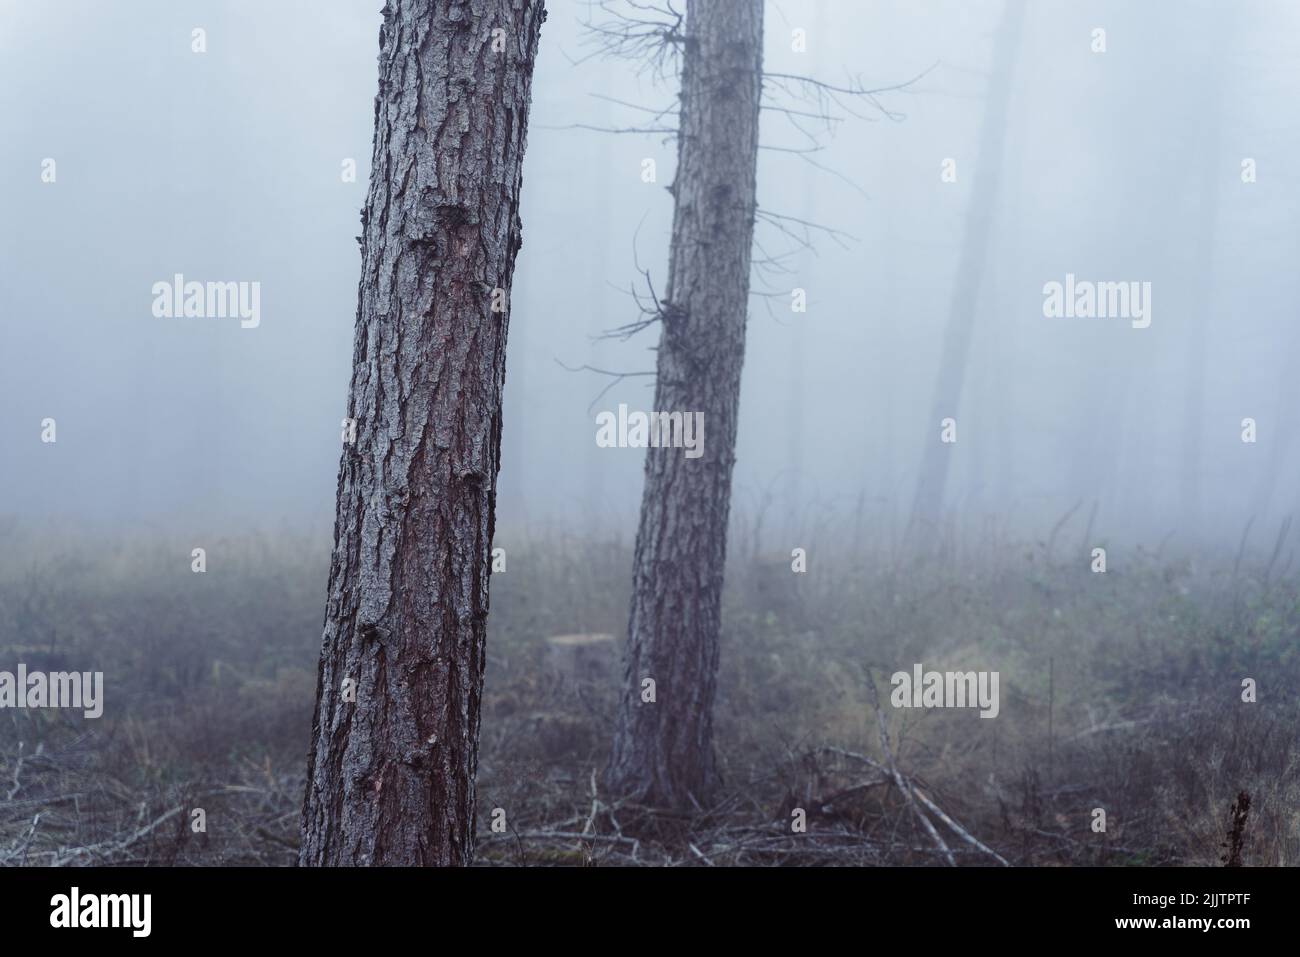 2 spruce trees in foggy forest Stock Photo